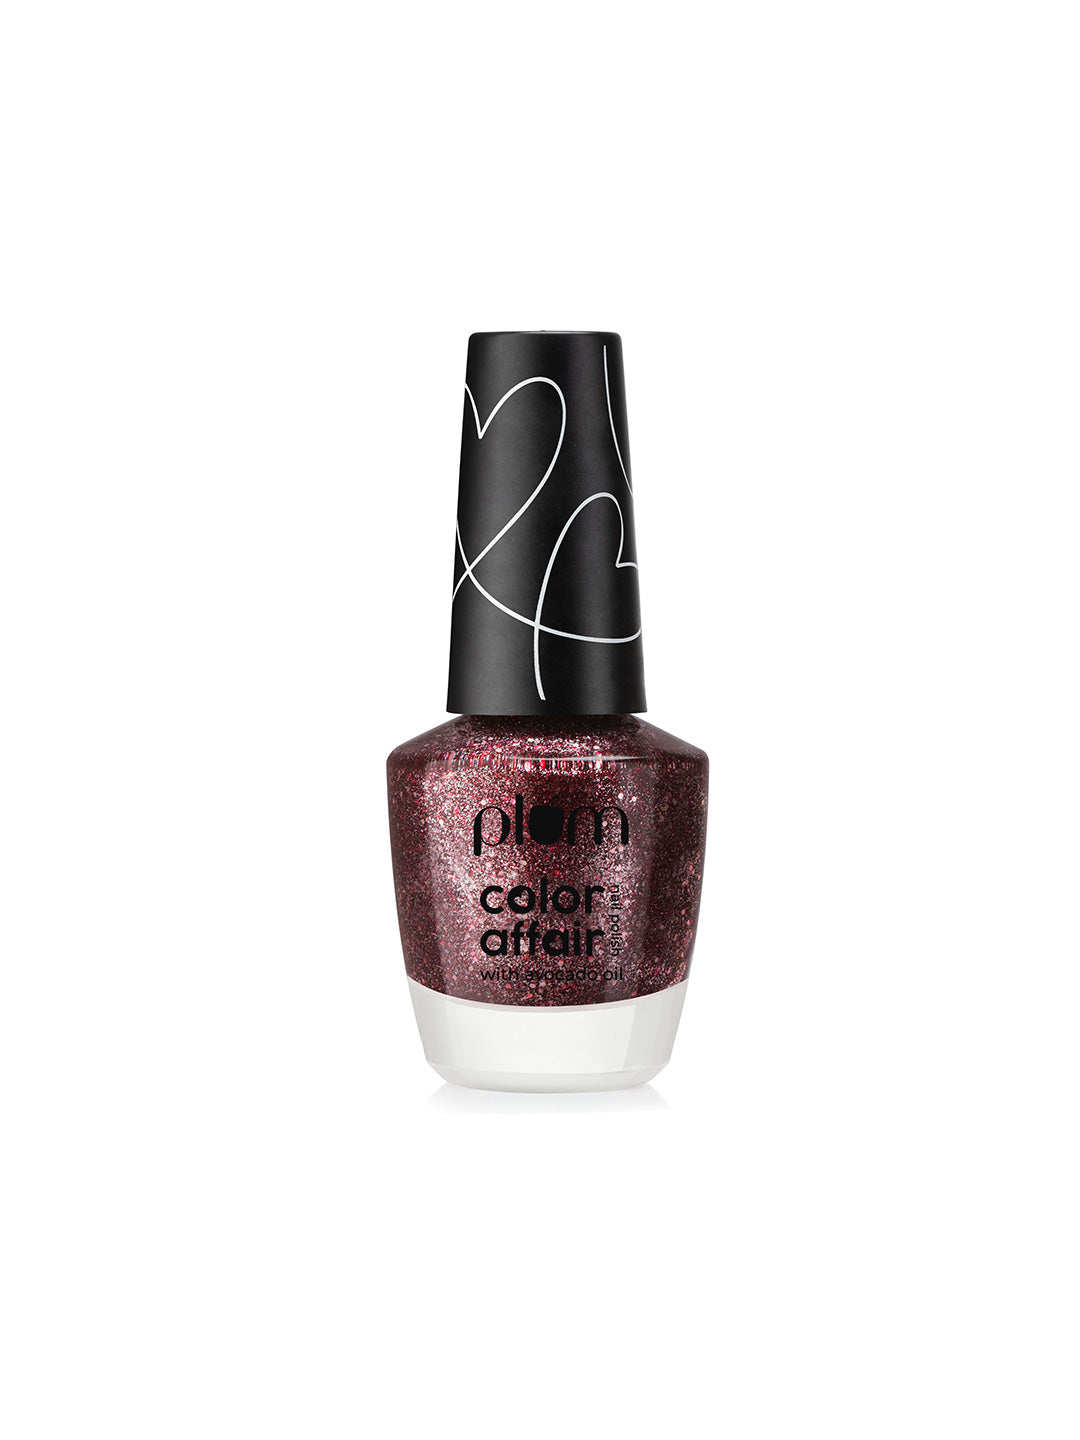 Plum Color Affair Nail Polish All That Glitters Collection | 3D Finish With Pearls & Glitters | 7-Free Formula | Cherry Mars - 169 | 11ml